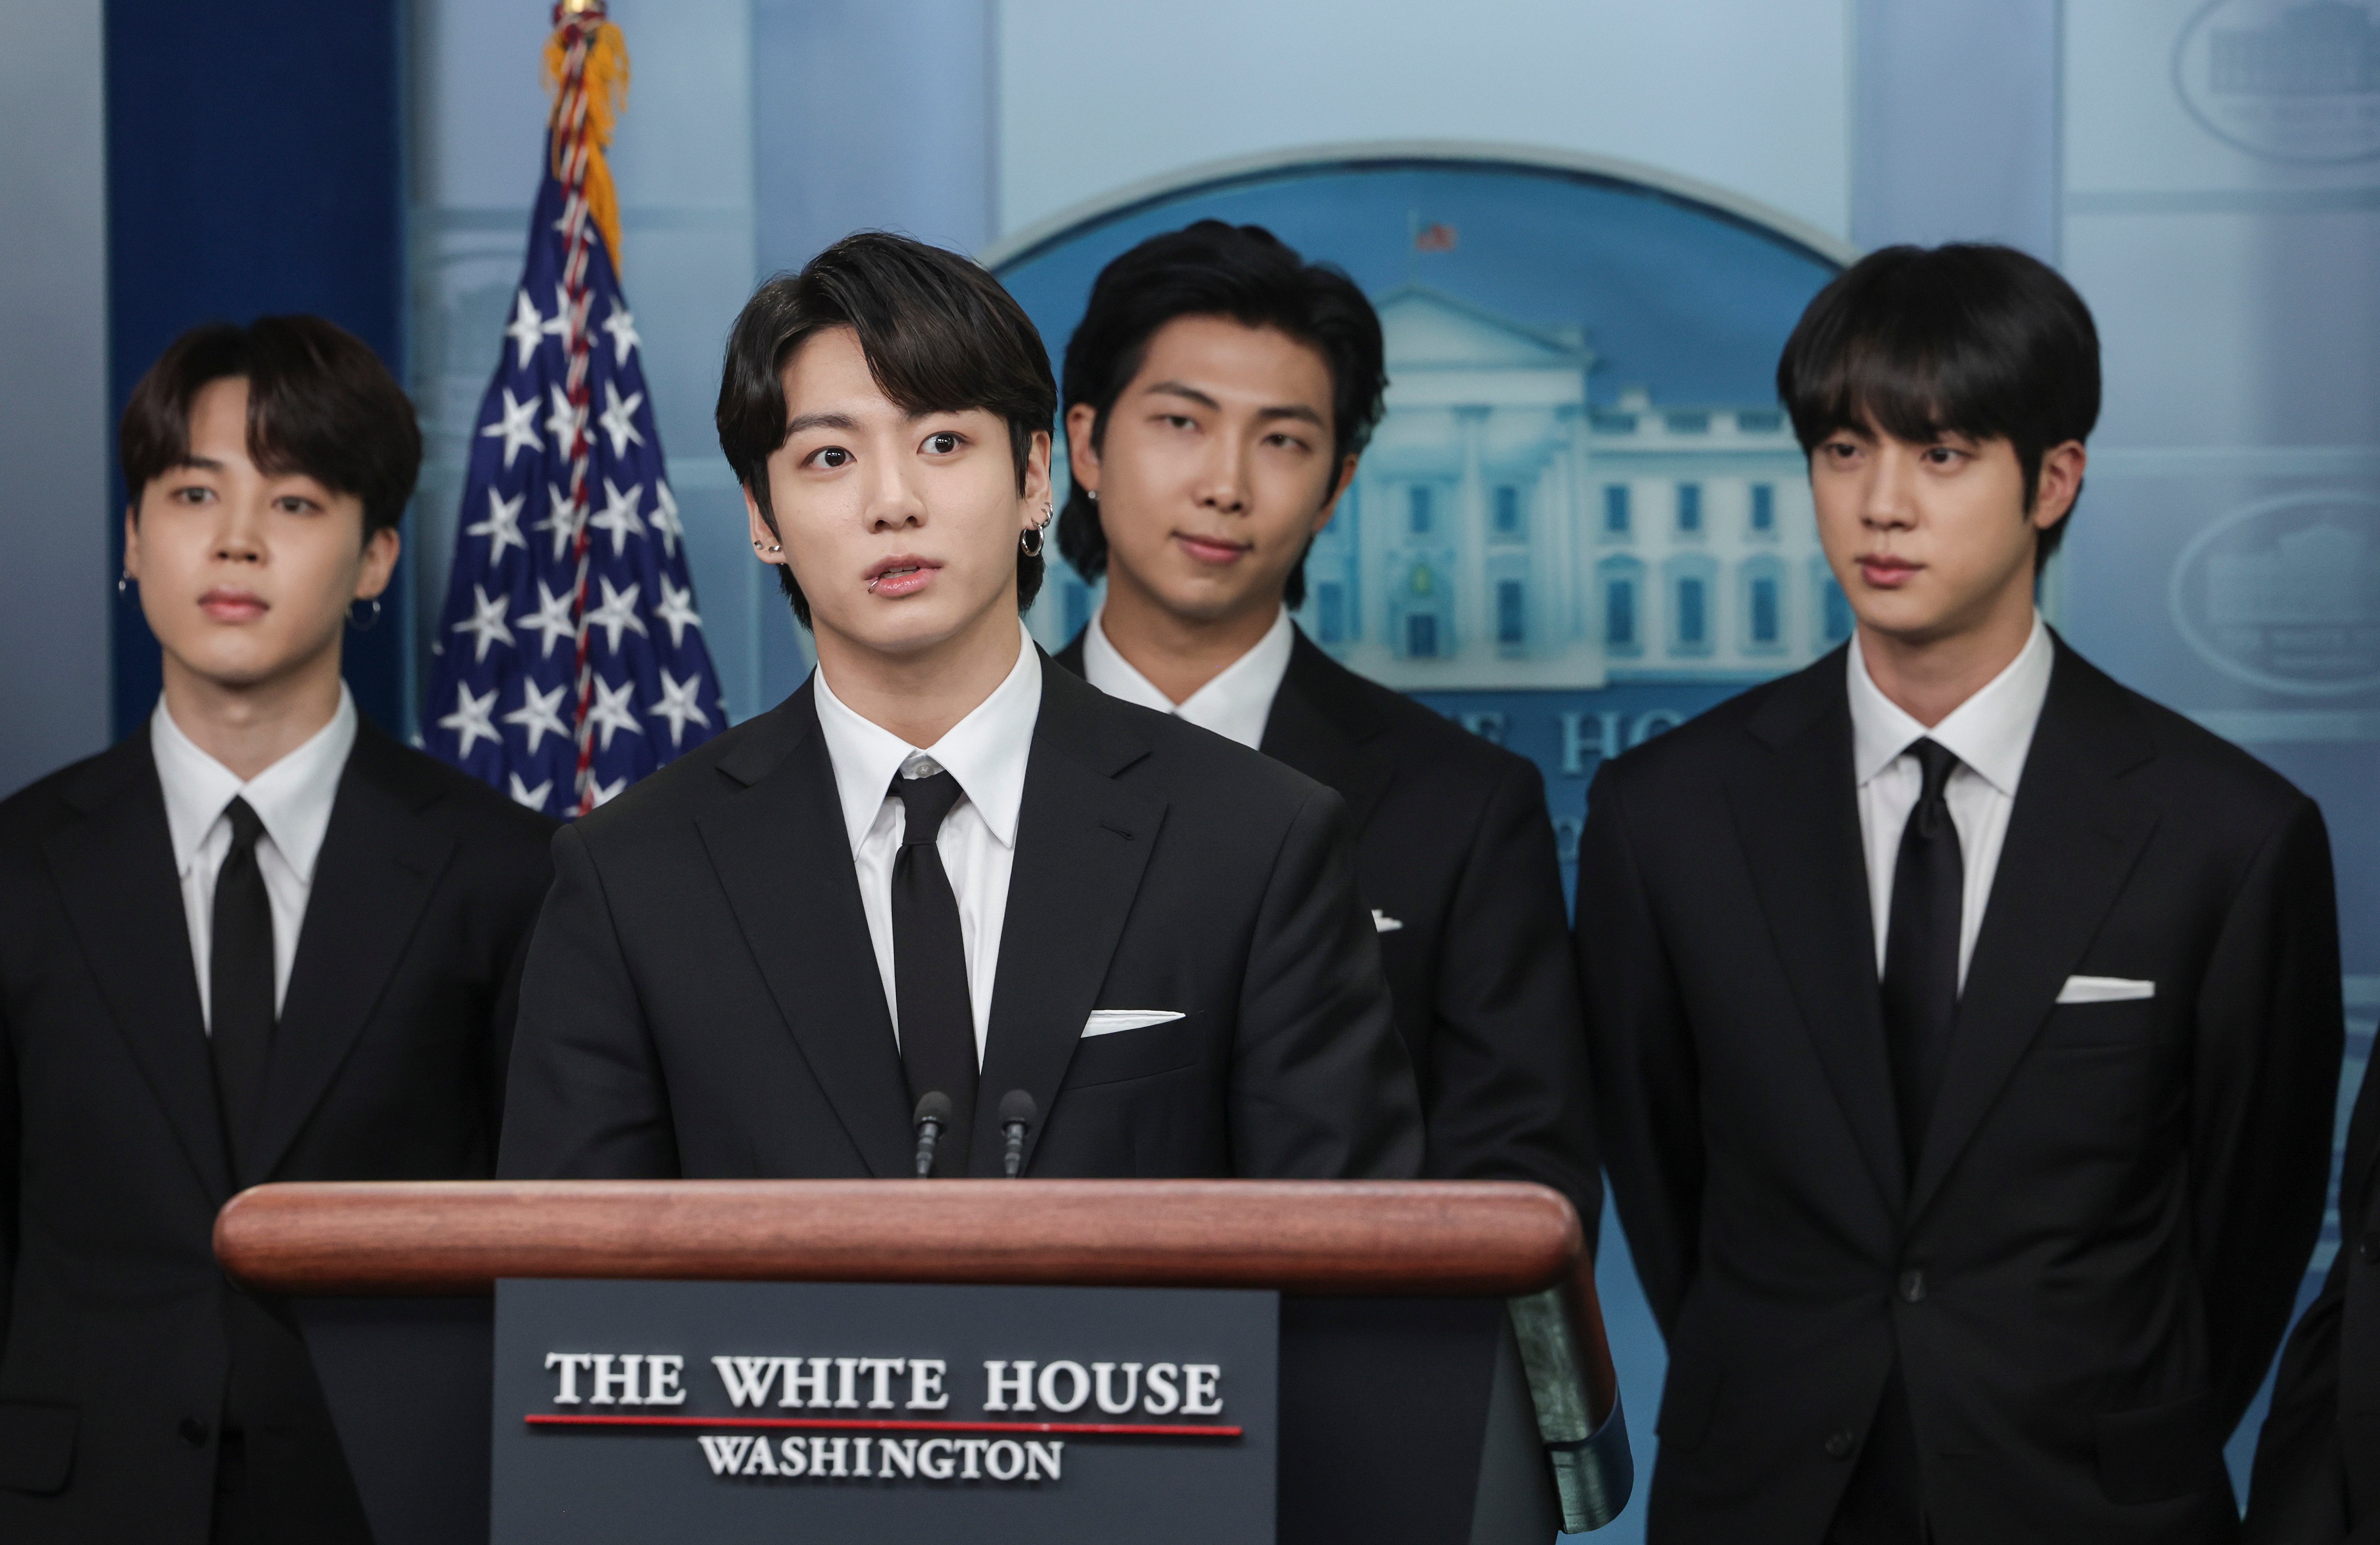 Jimin, Jungkook, RM, and Jin of the pop group BTS speak at the White House